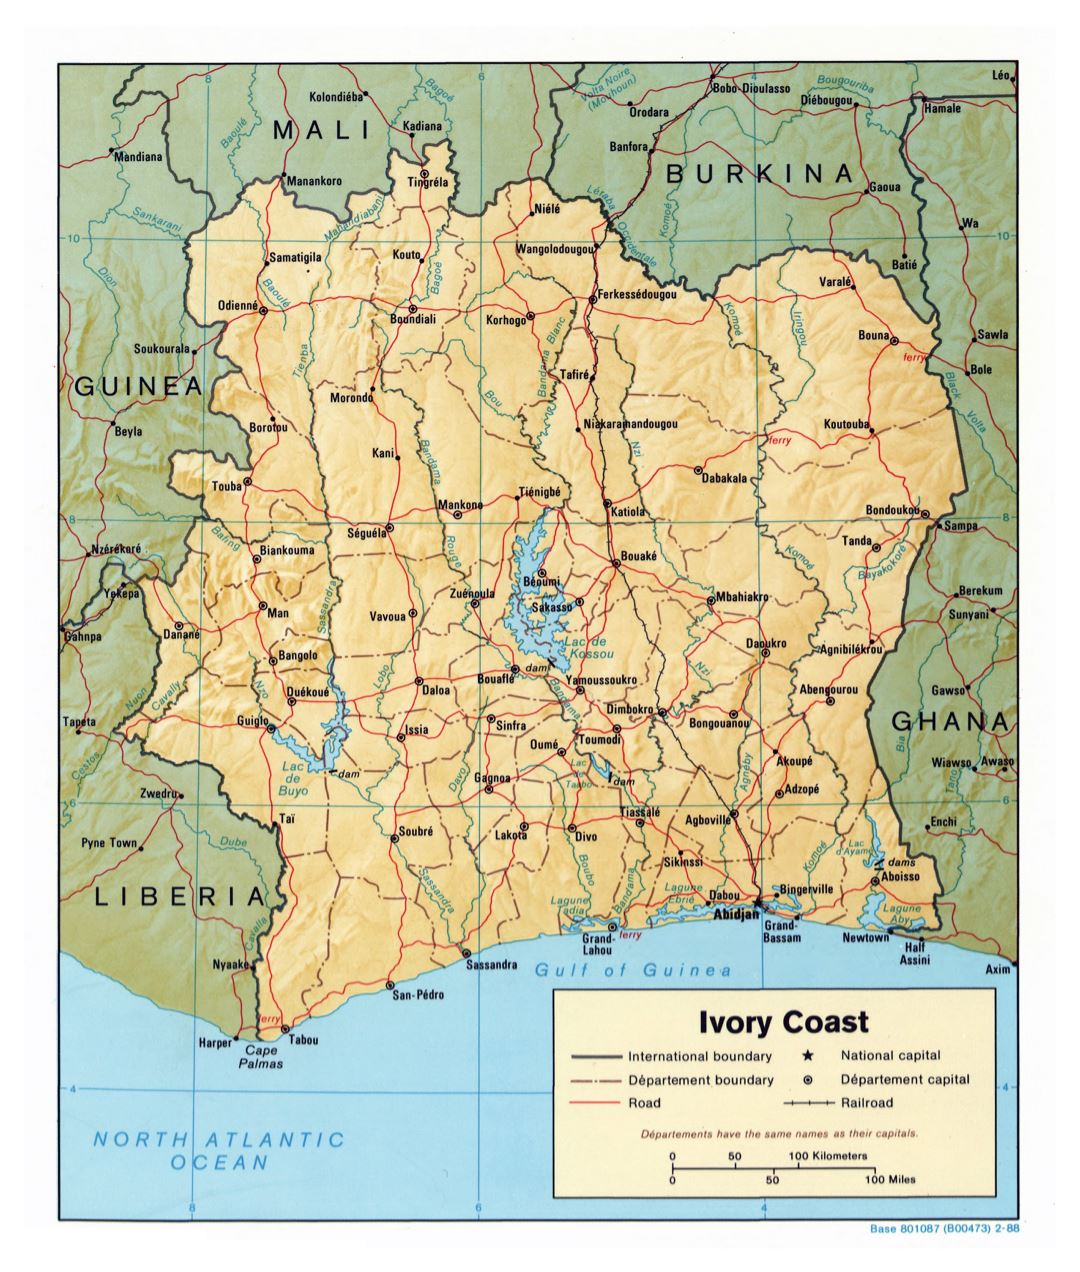 Large scale political and administrative map of Cote d'Ivoire with relief, roads, railroads and major cities - 1988